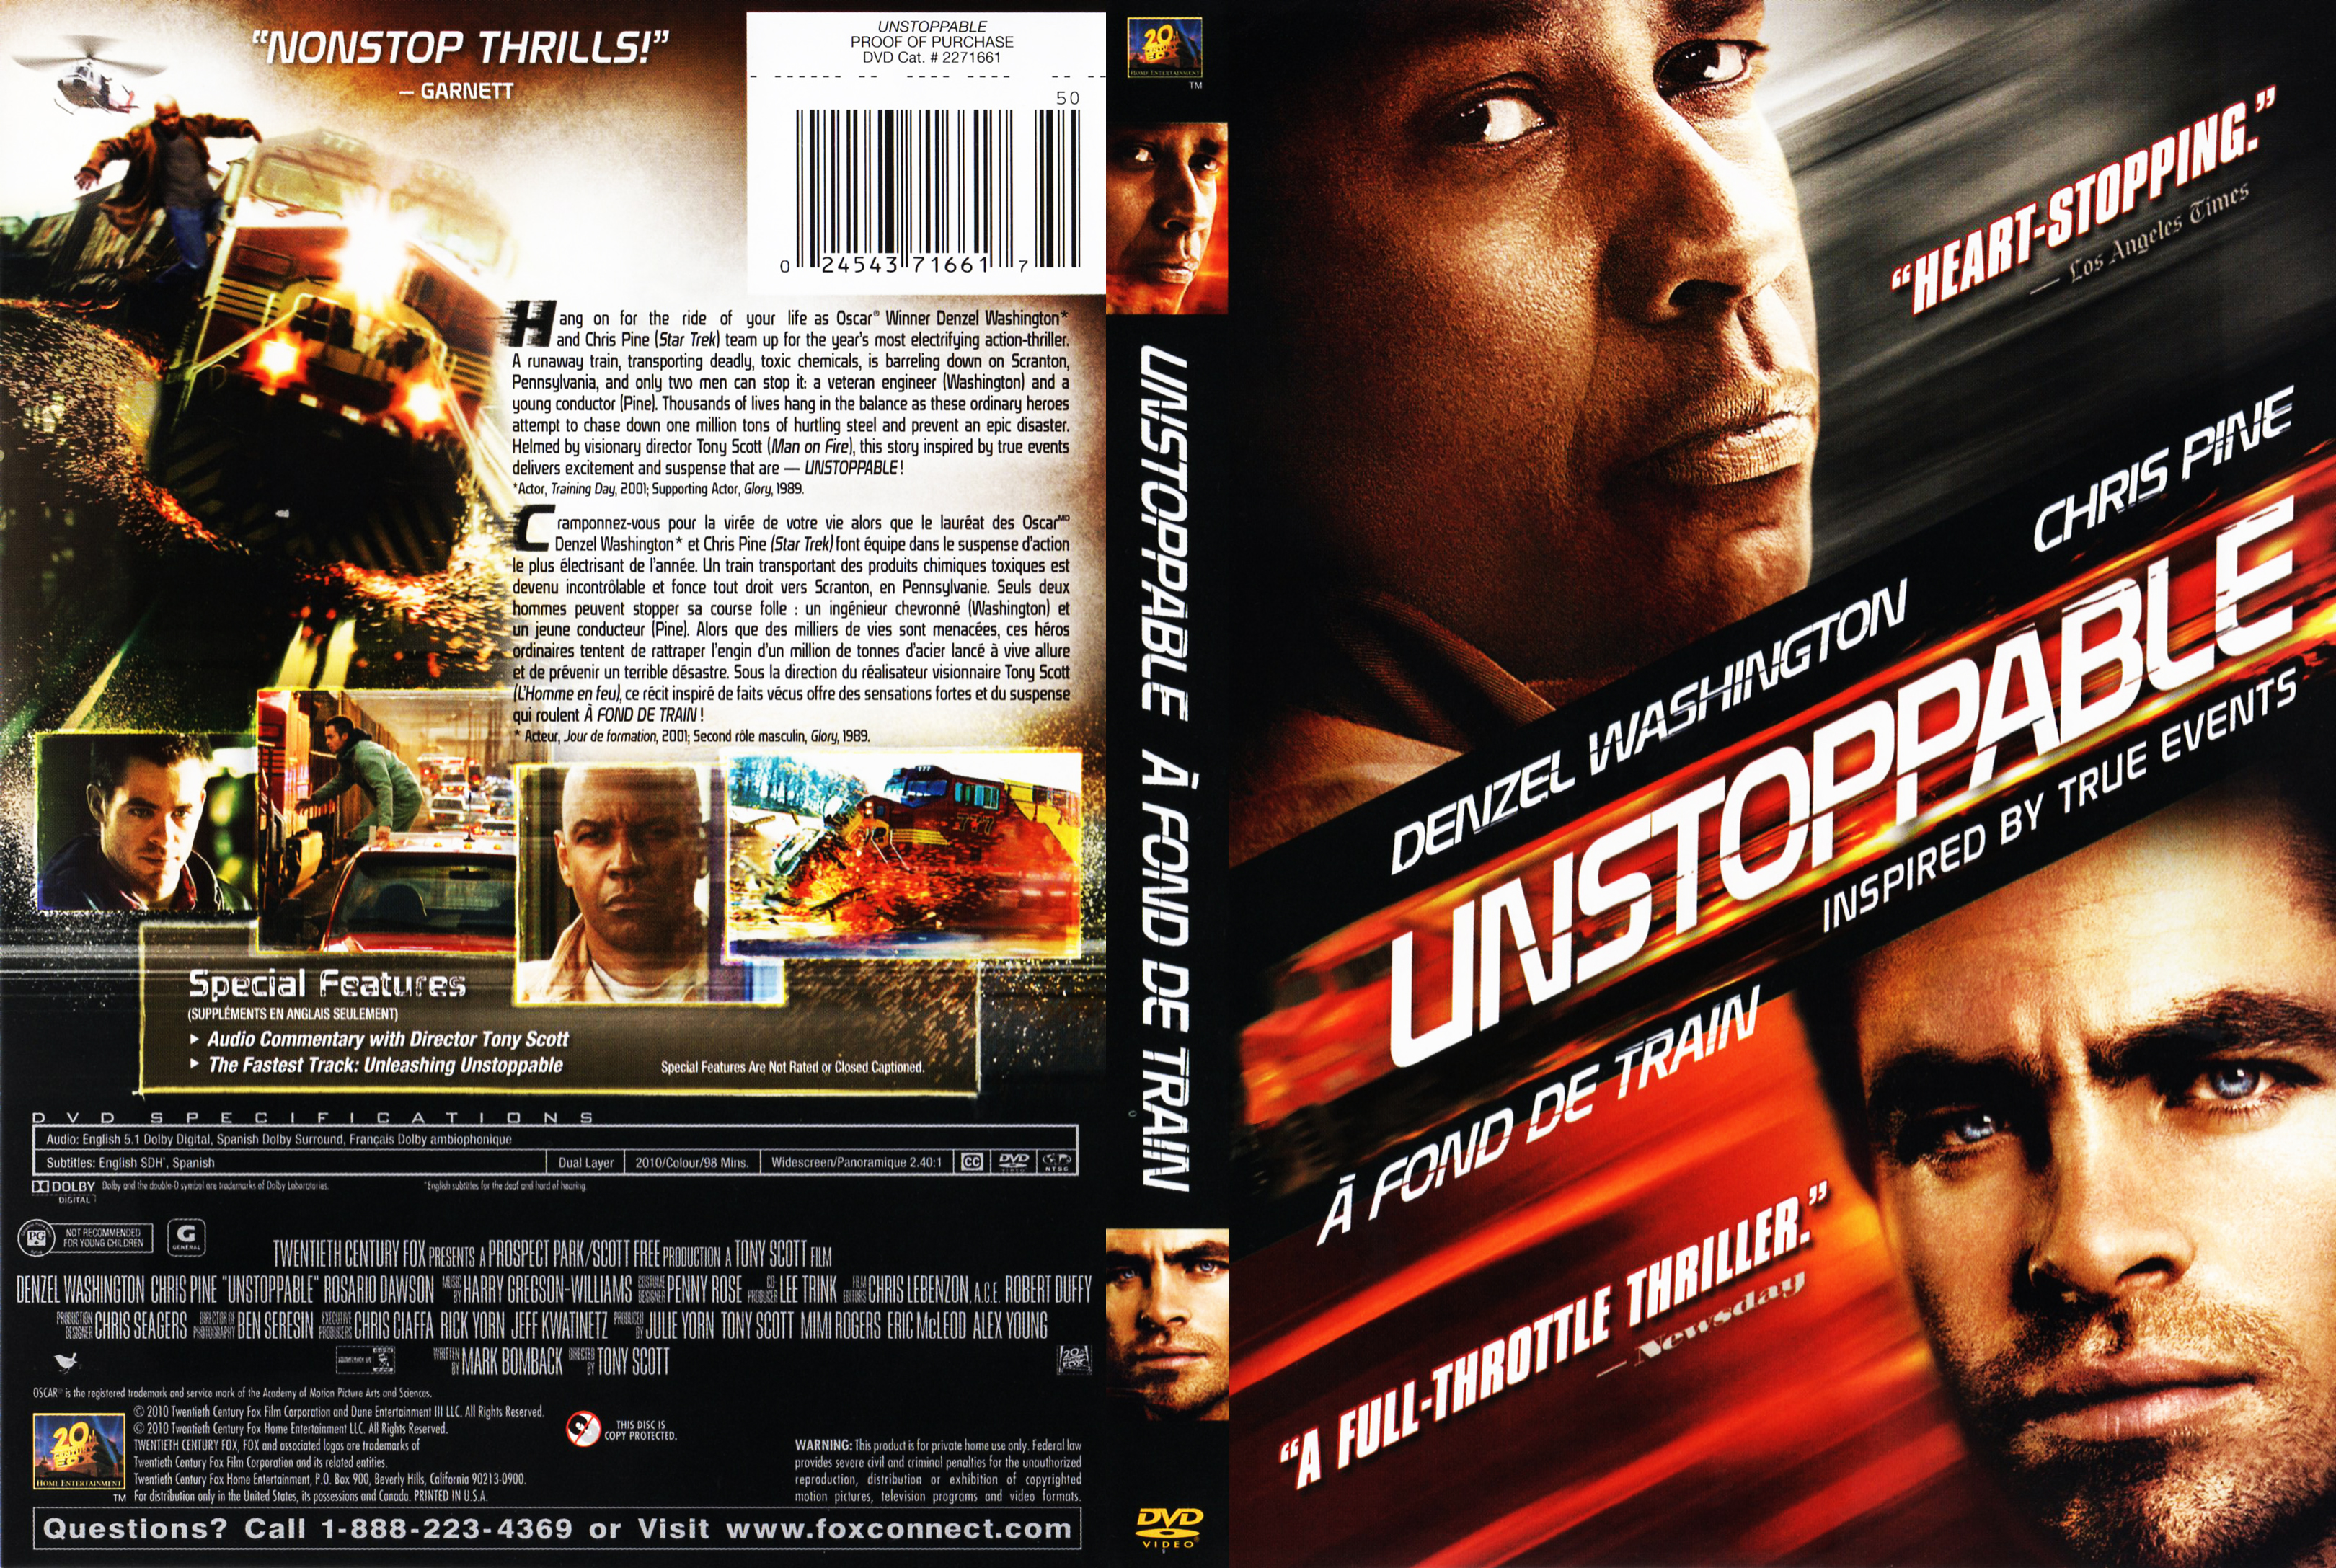 Jaquette DVD Unstoppable (Canadienne)